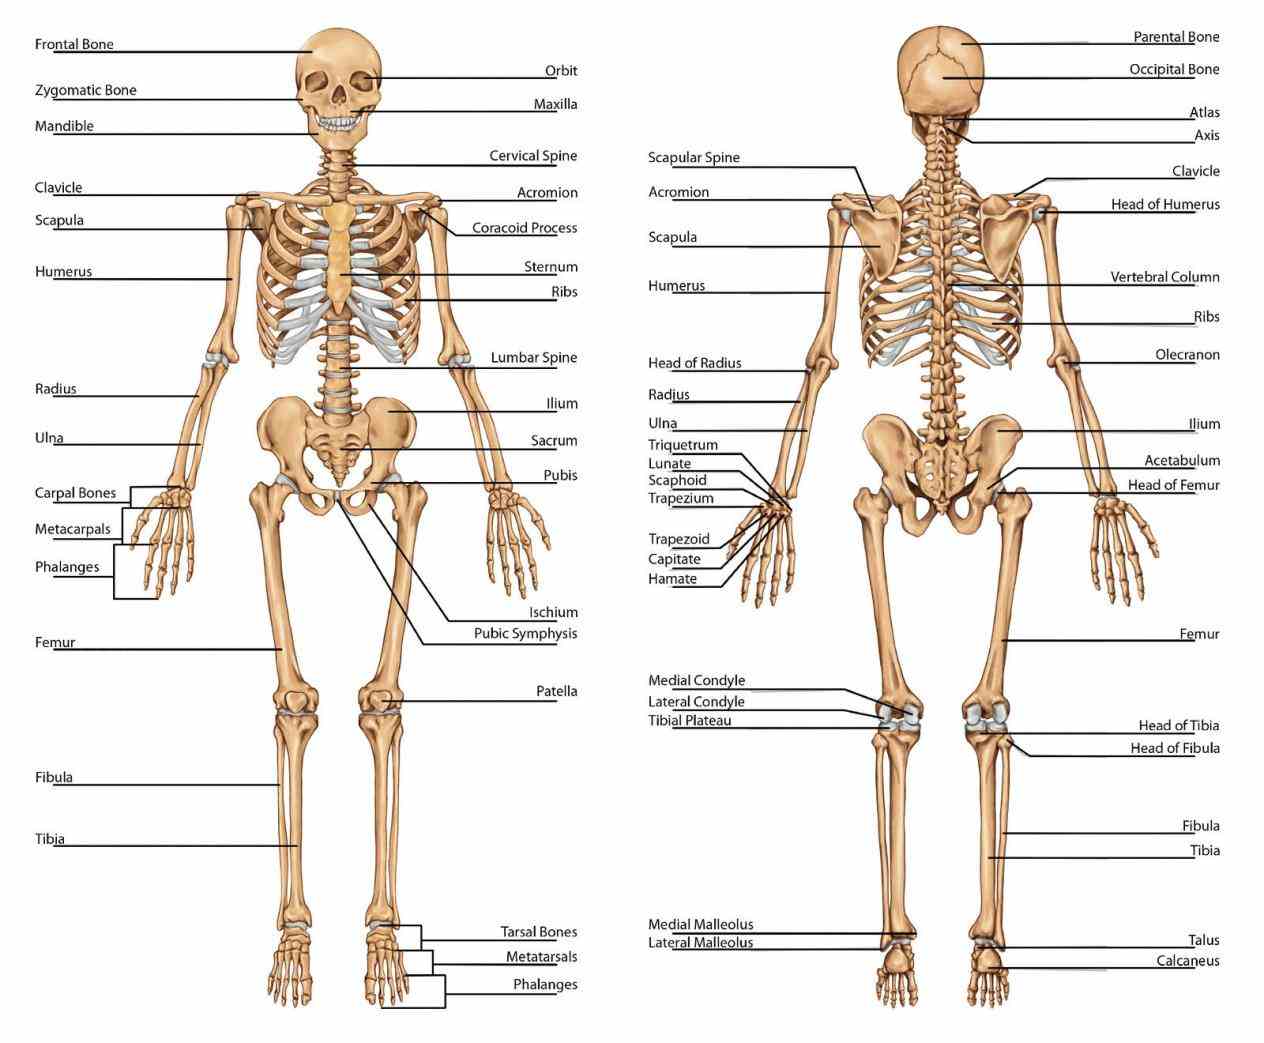 various regions of human body through draganddrop exercises anatomy Major Regions Of The Body Anatomy • is the study